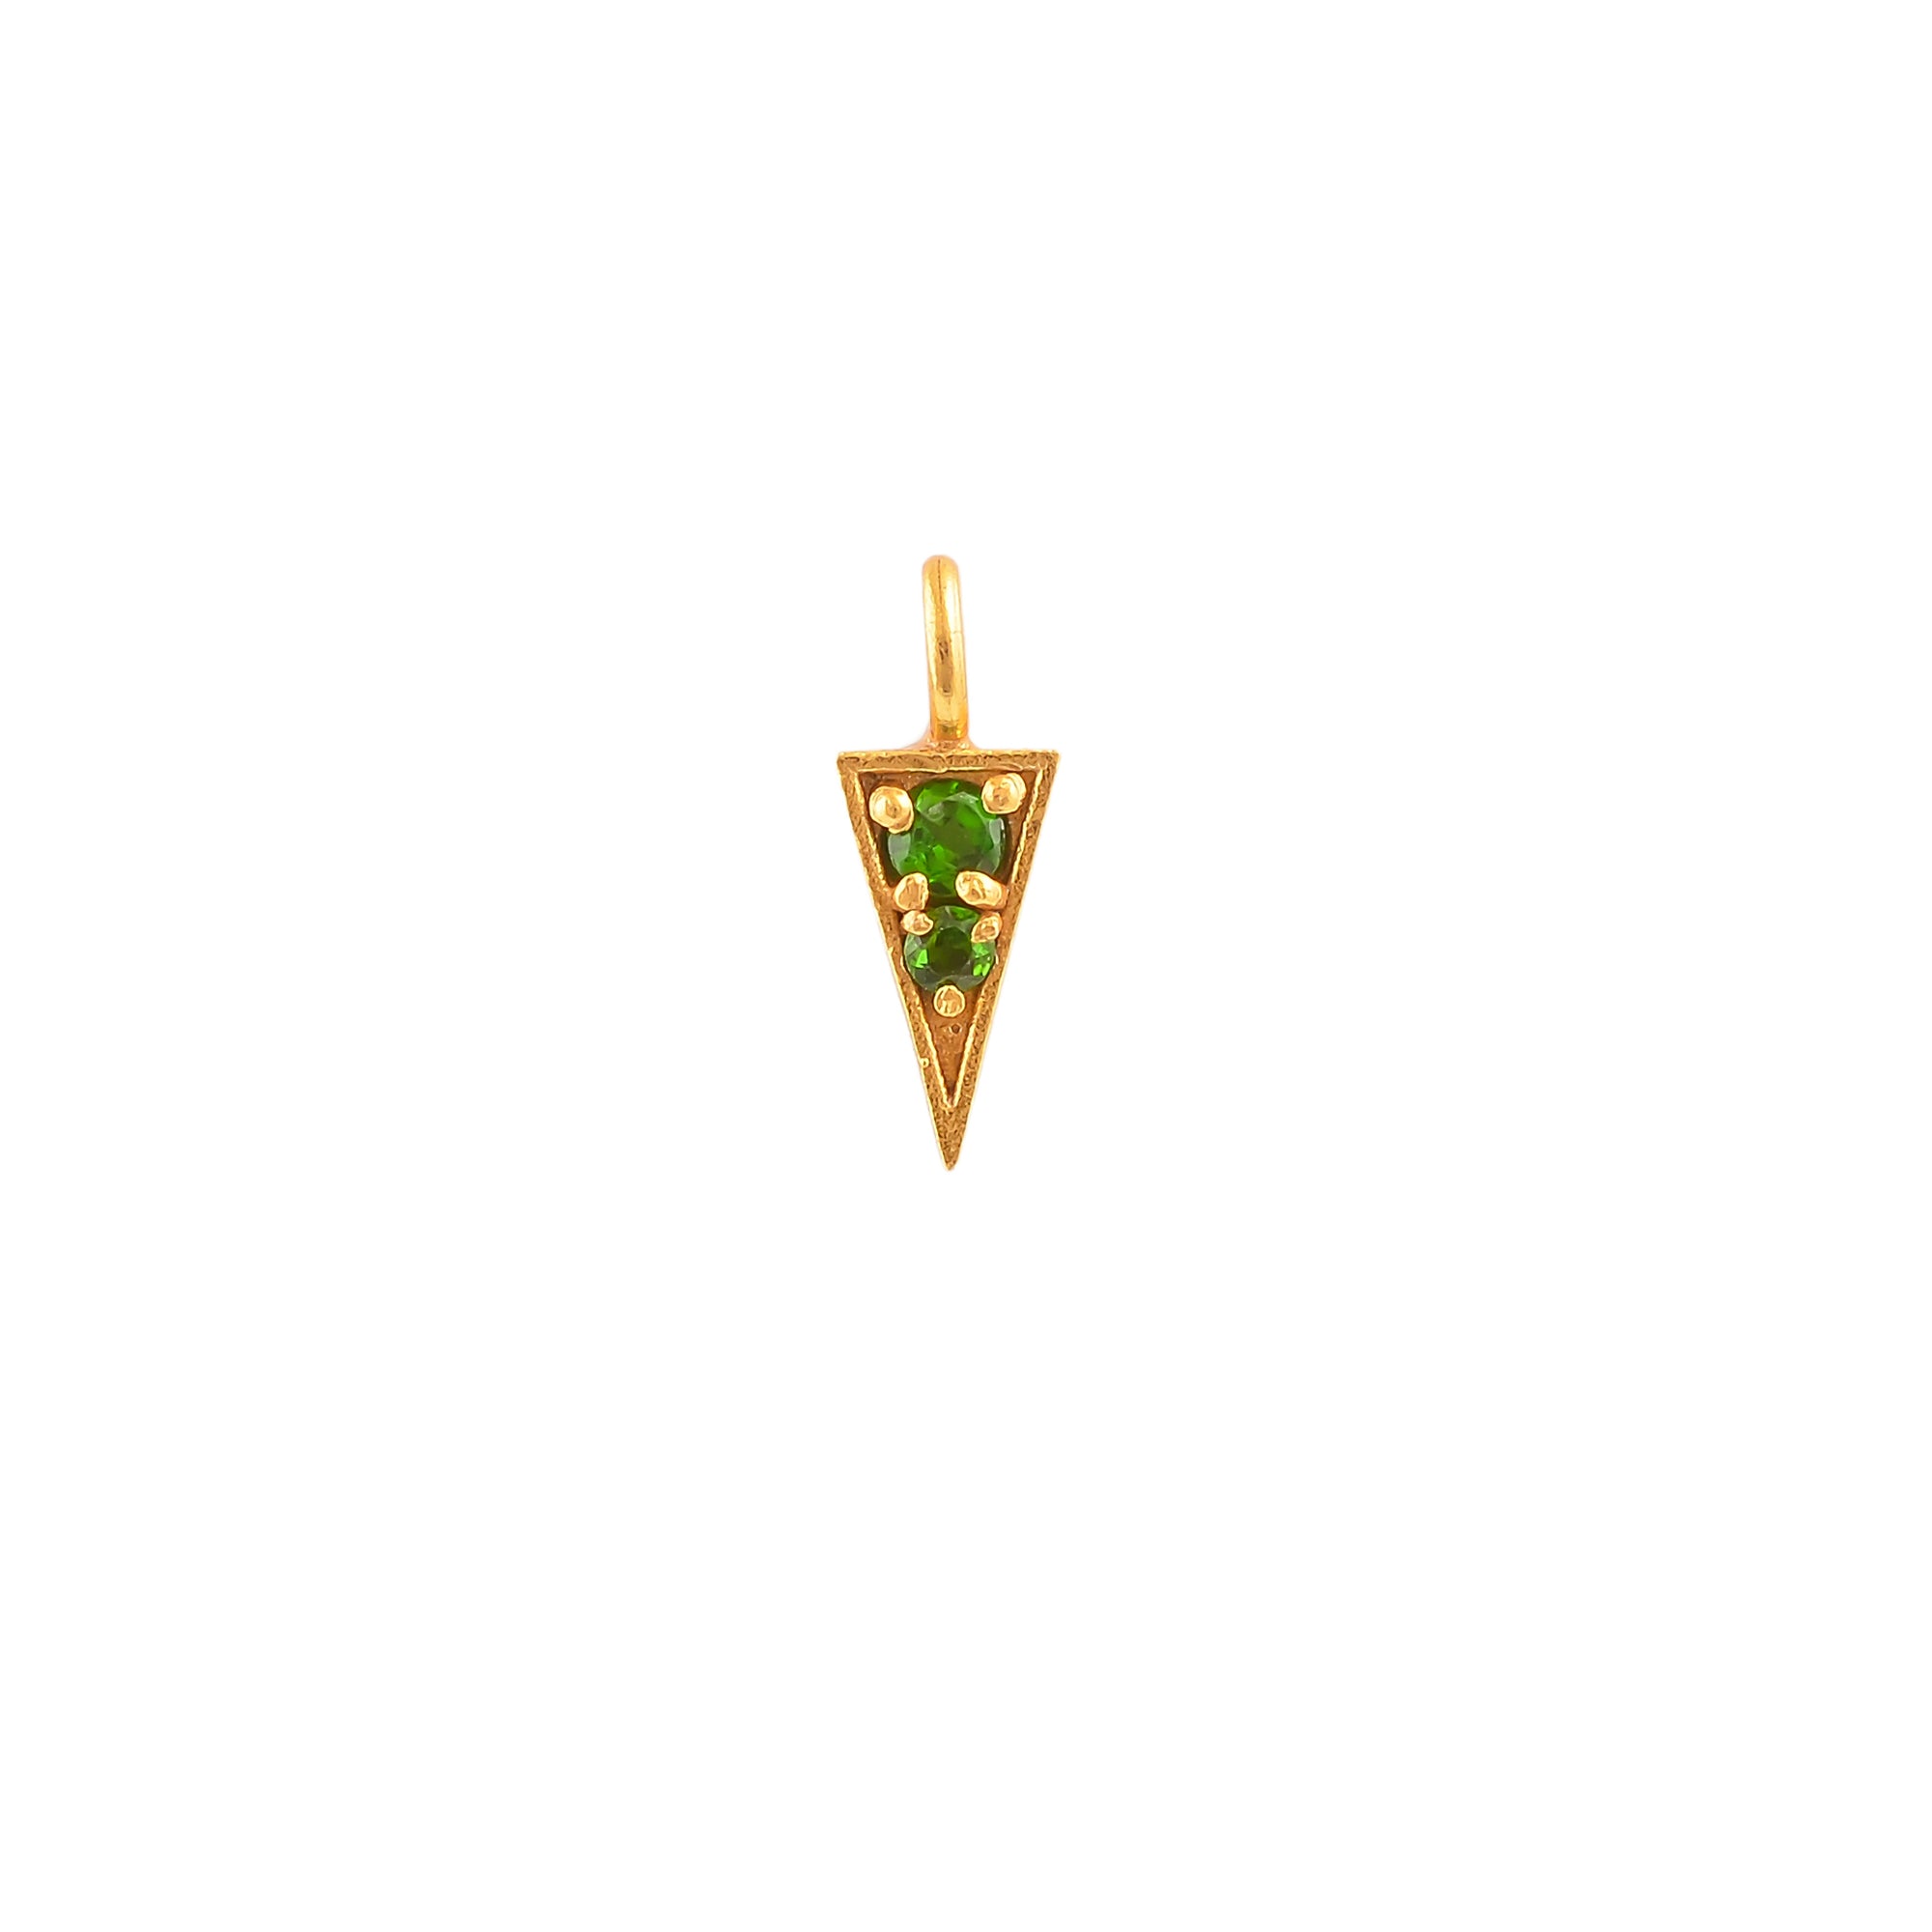 Buy Indian Handcrafted Silver Gold Plated Green Tourmaline Pendant